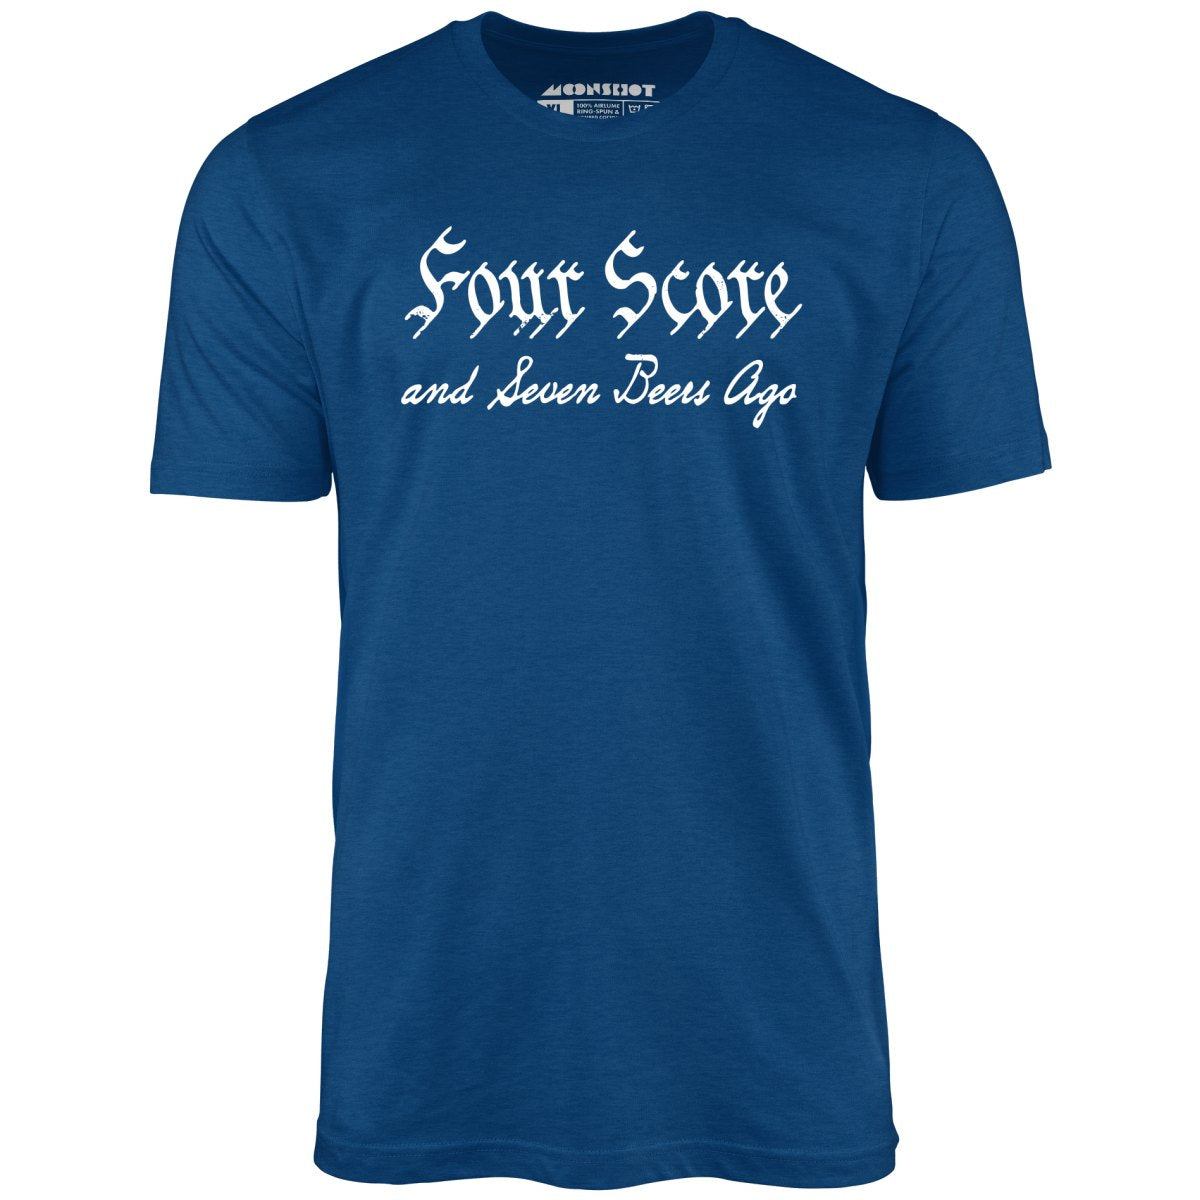 Four Score and Seven Beers Ago - Unisex T-Shirt